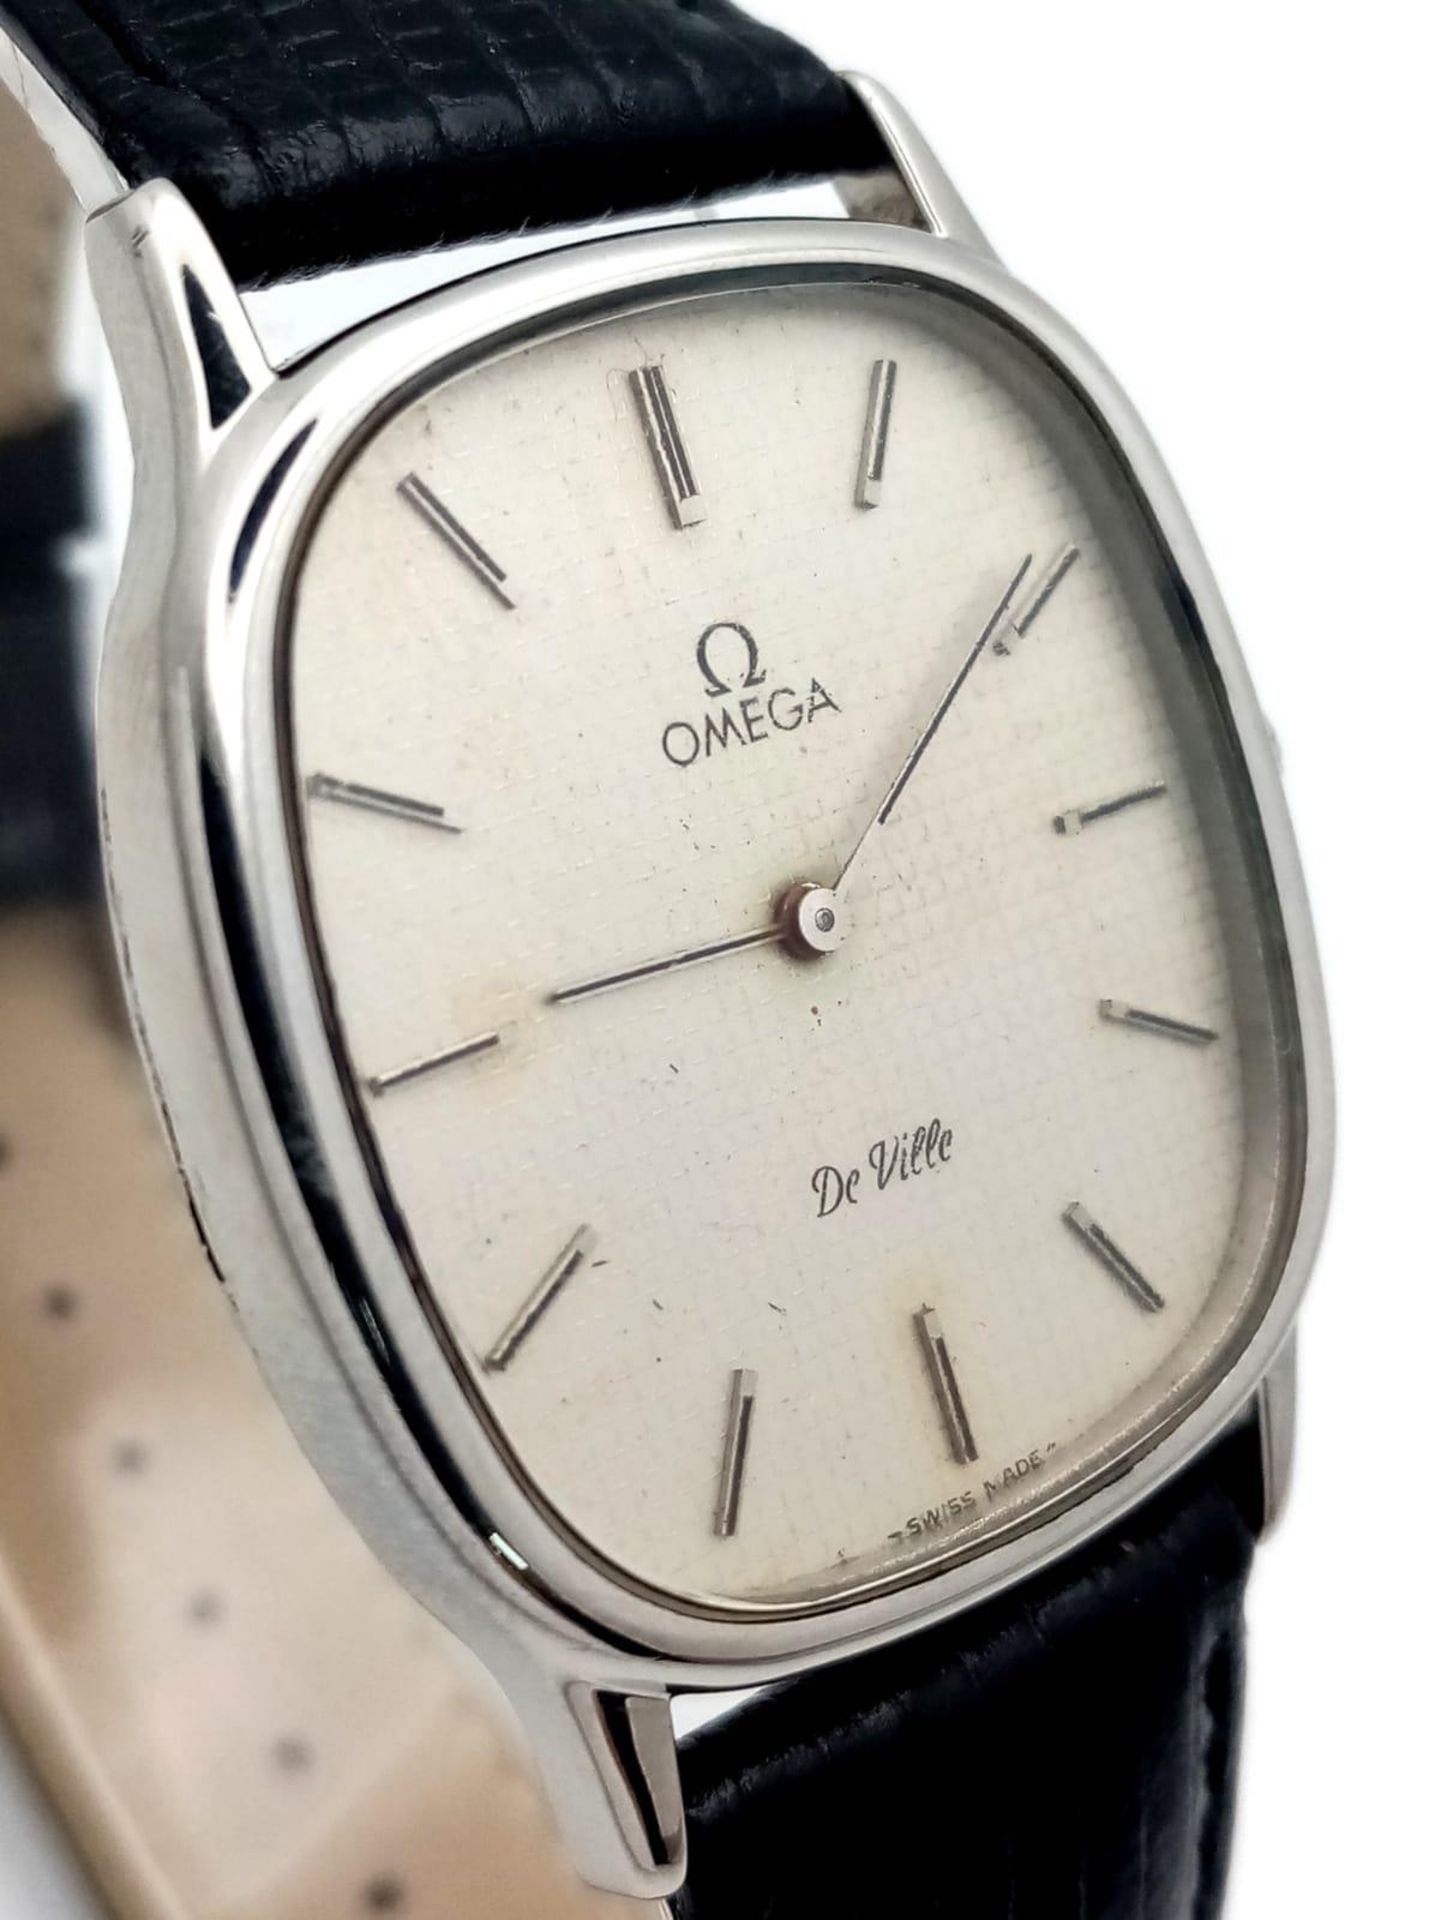 AN OMEGA DE VILLE IN STAINLESS STEEL WITH MANUAL WINDING MOVEMENT AND ON A BLACK LEATHER STRAP . - Image 3 of 6